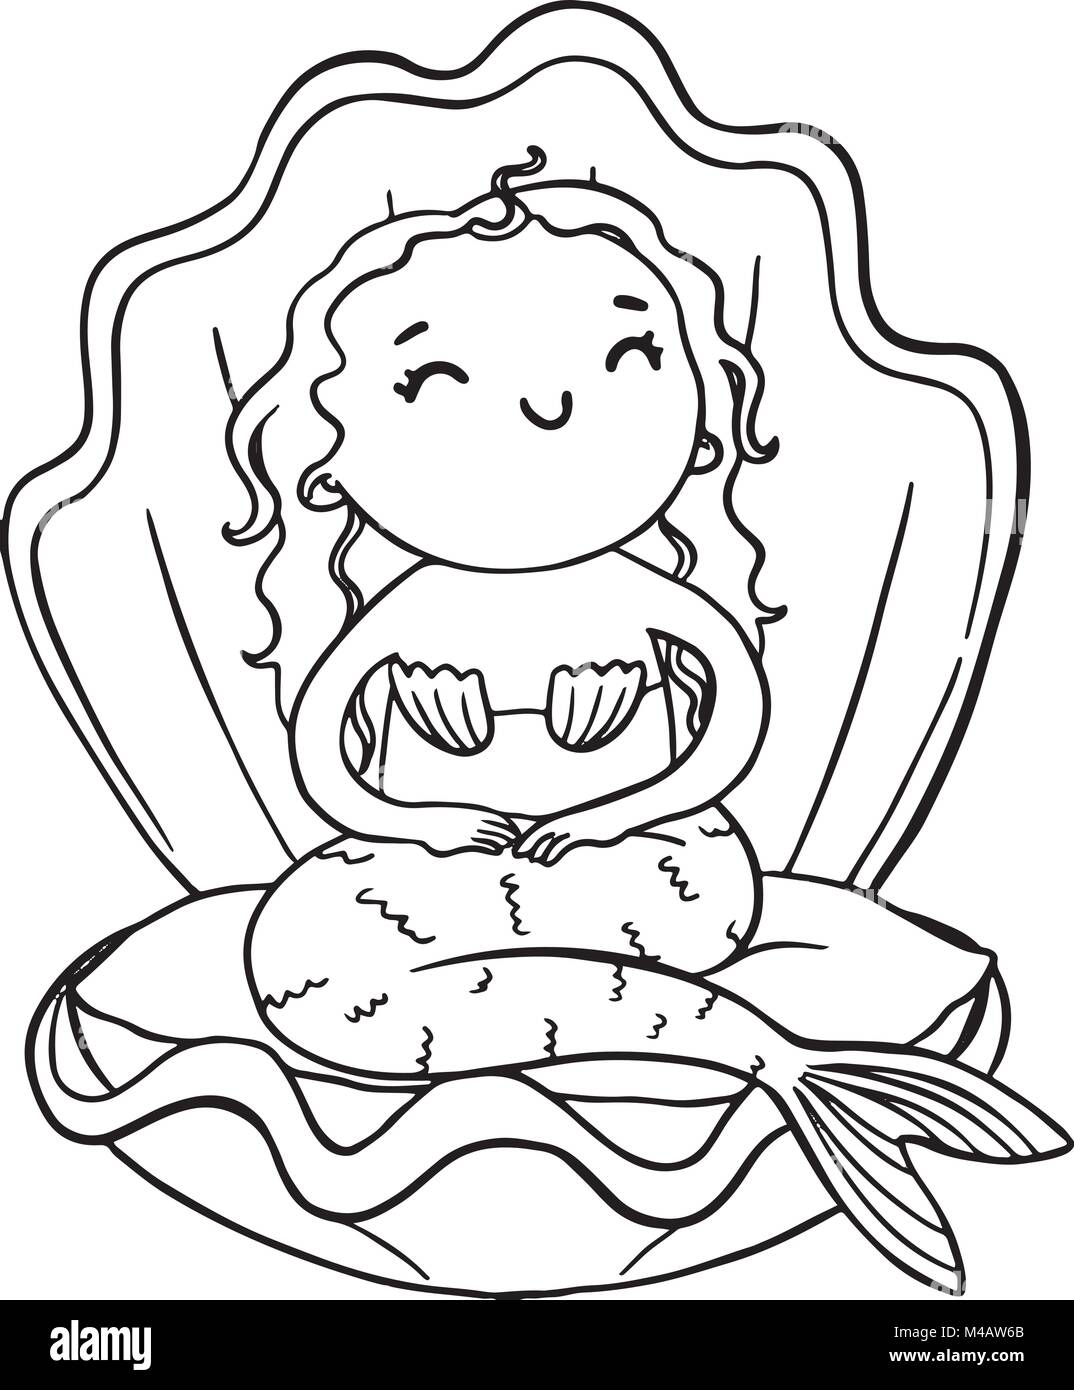 Outline cartoon mermaid. Vector isolated illustration for coloring. Stock Vector